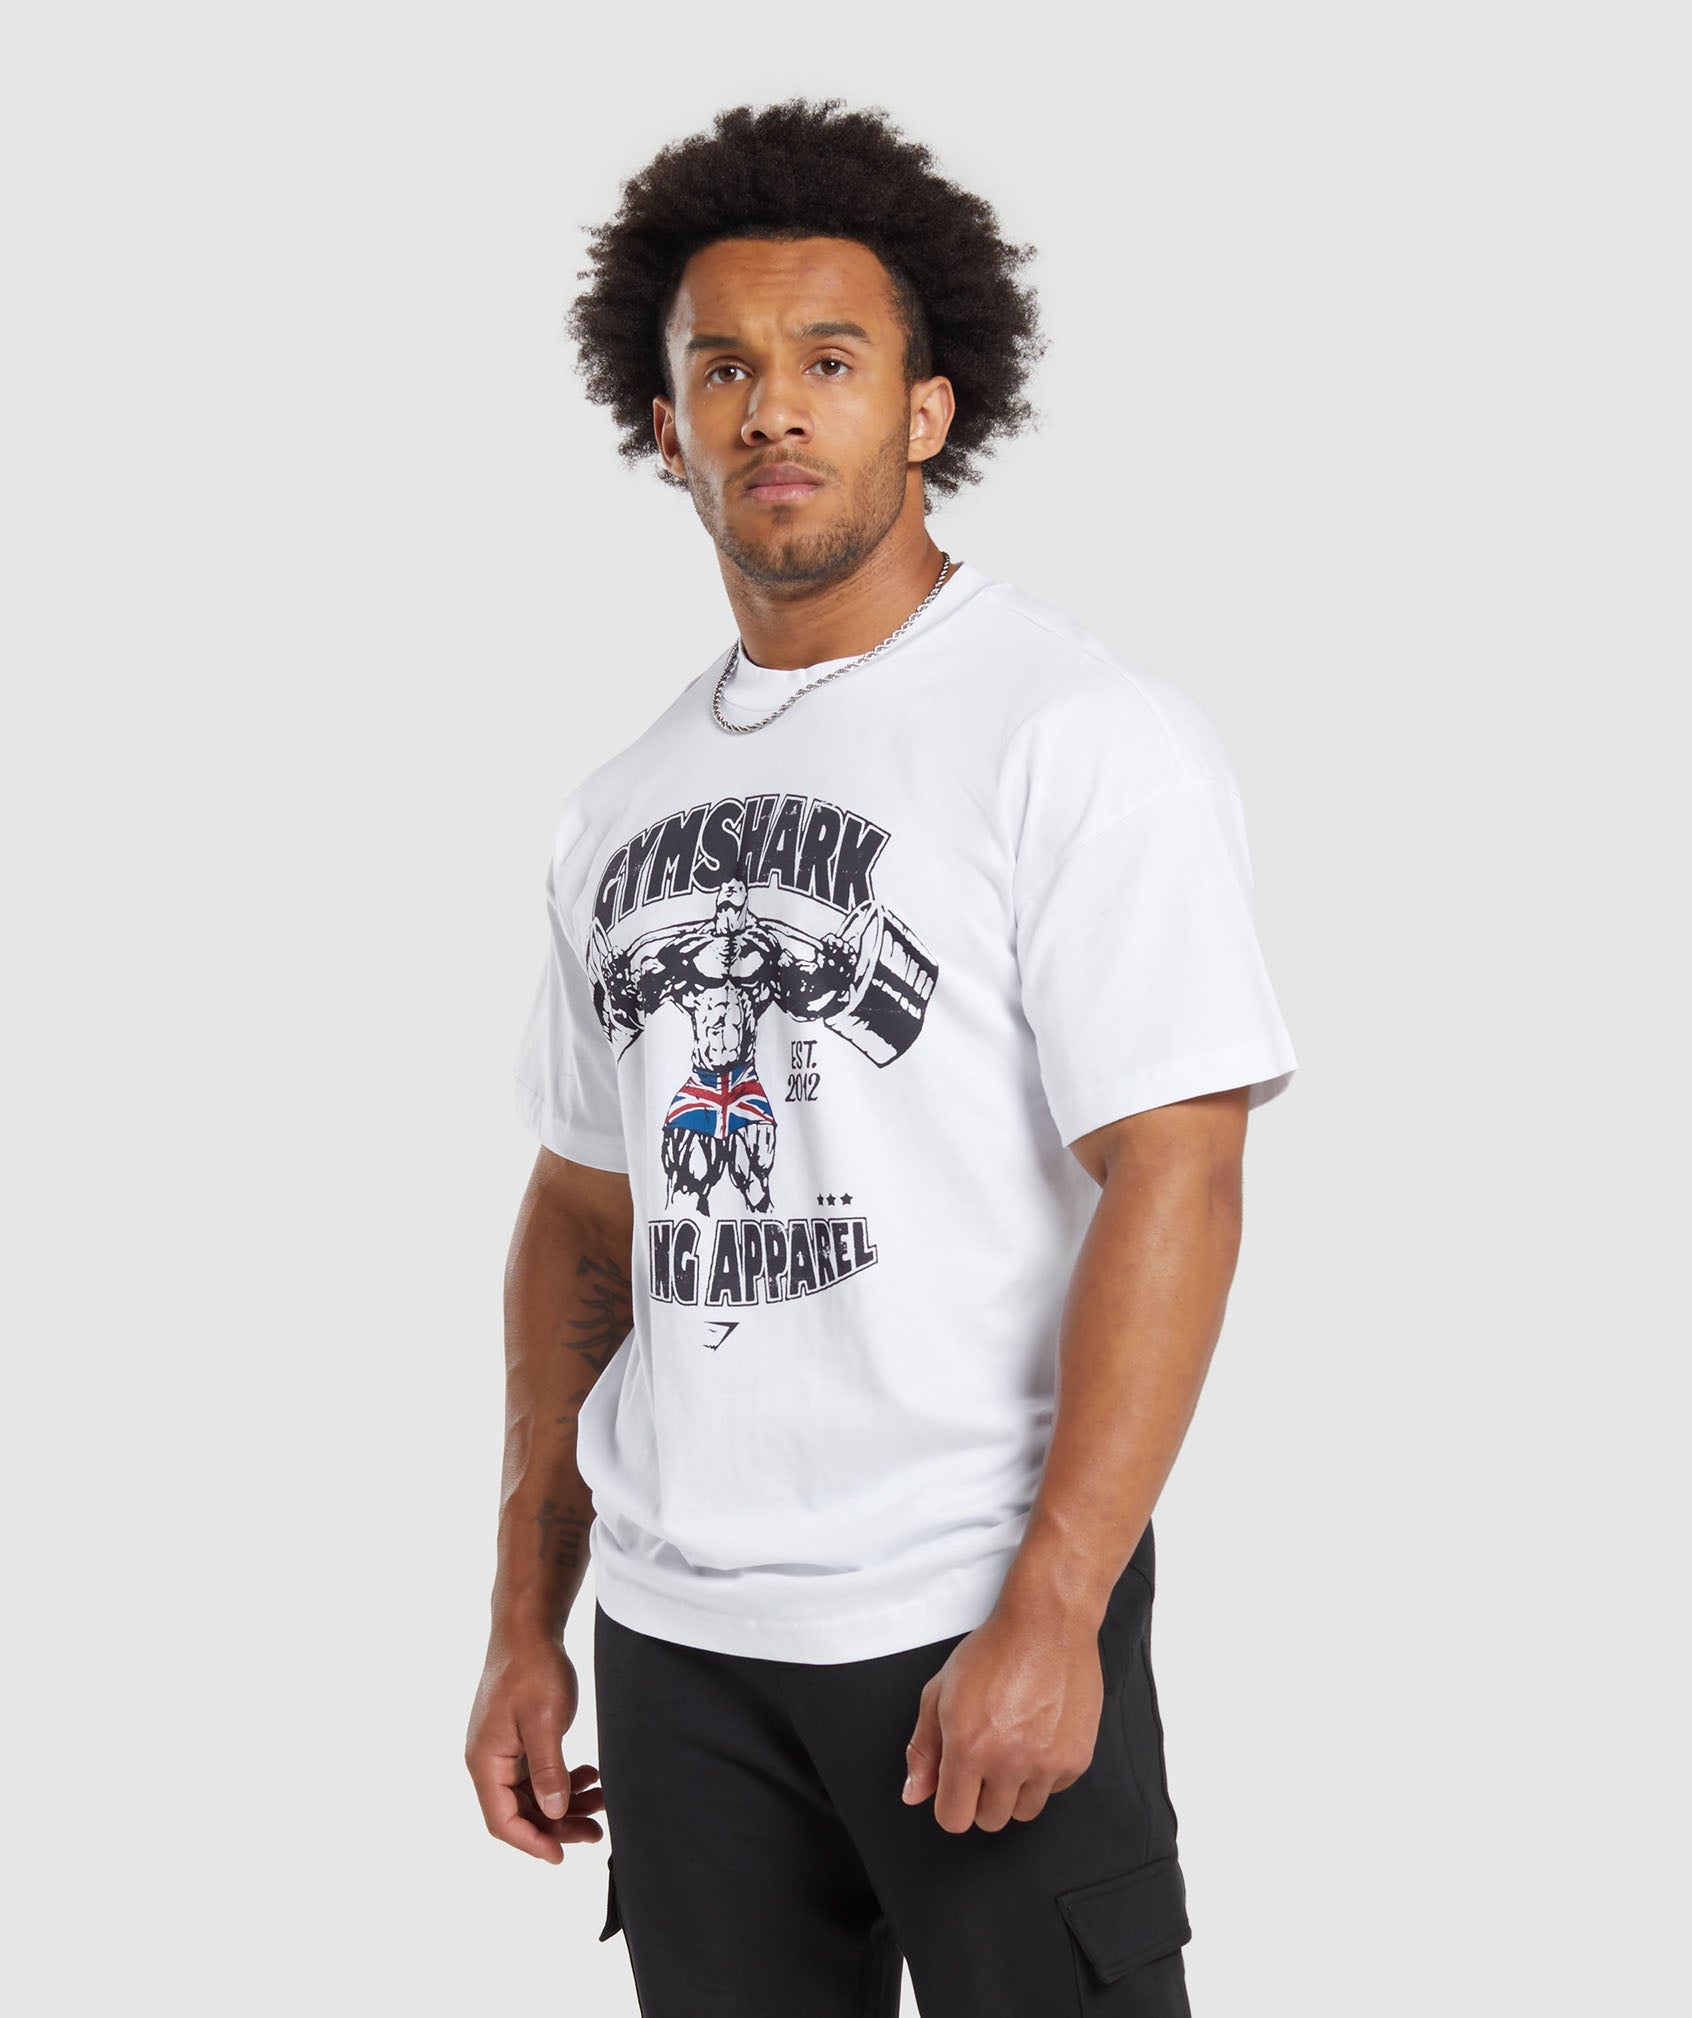 Lifting Apparel T-Shirt in White - view 3